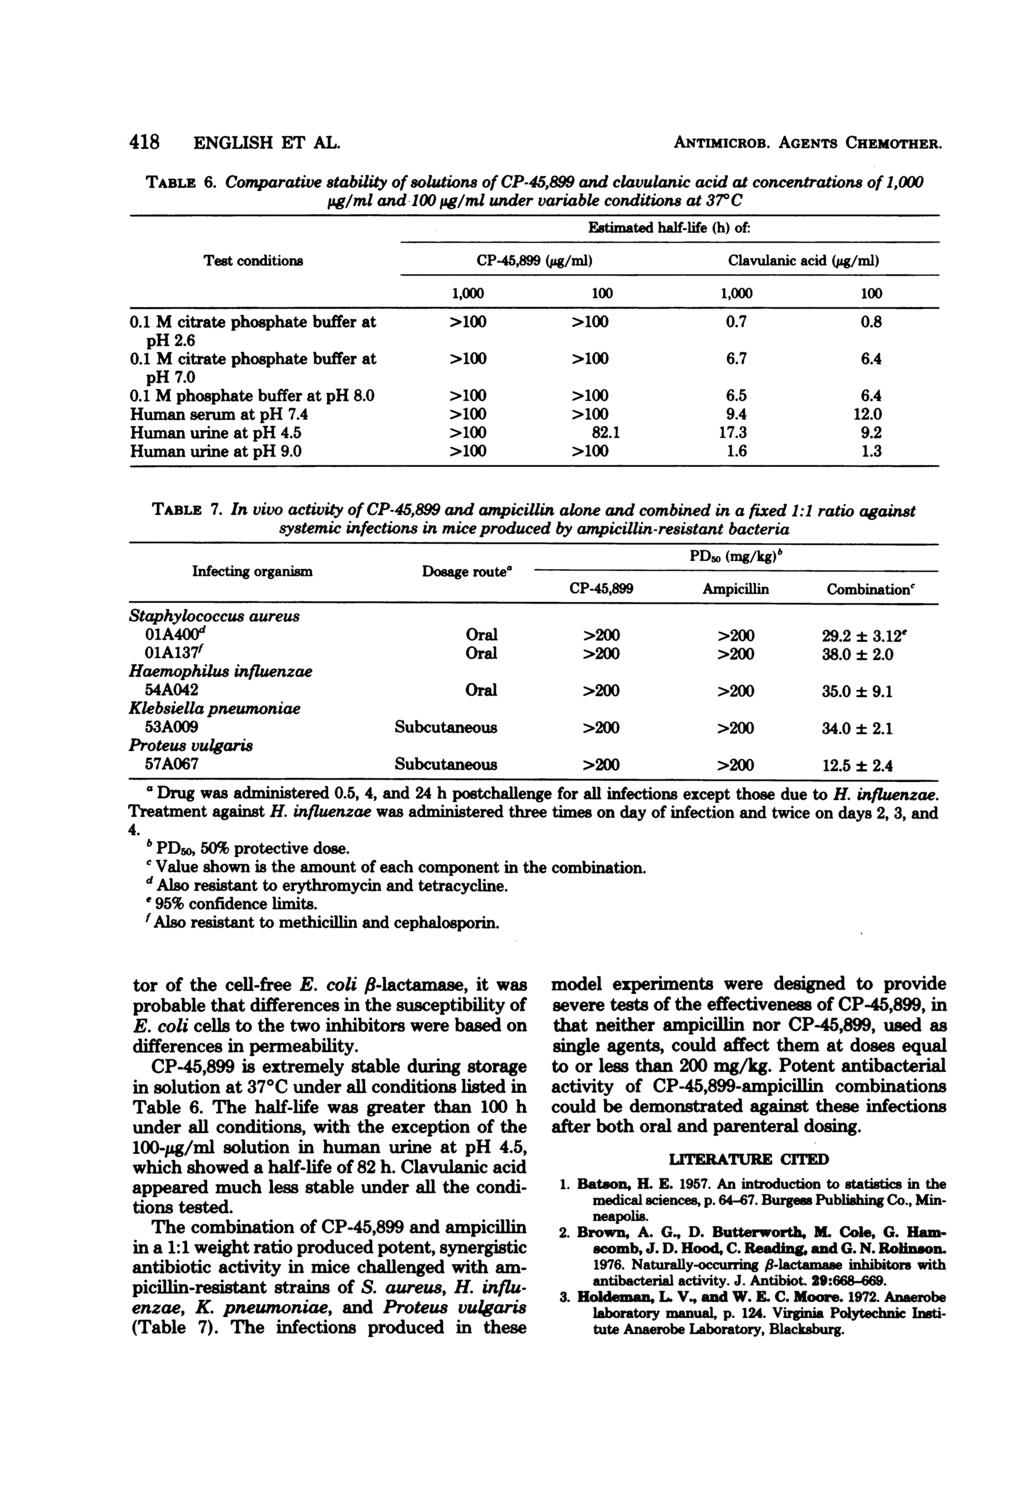 418 ENGLISH ET AL. ANTIMICROB. AGENTS CHEMOTHER. TABLE 6.